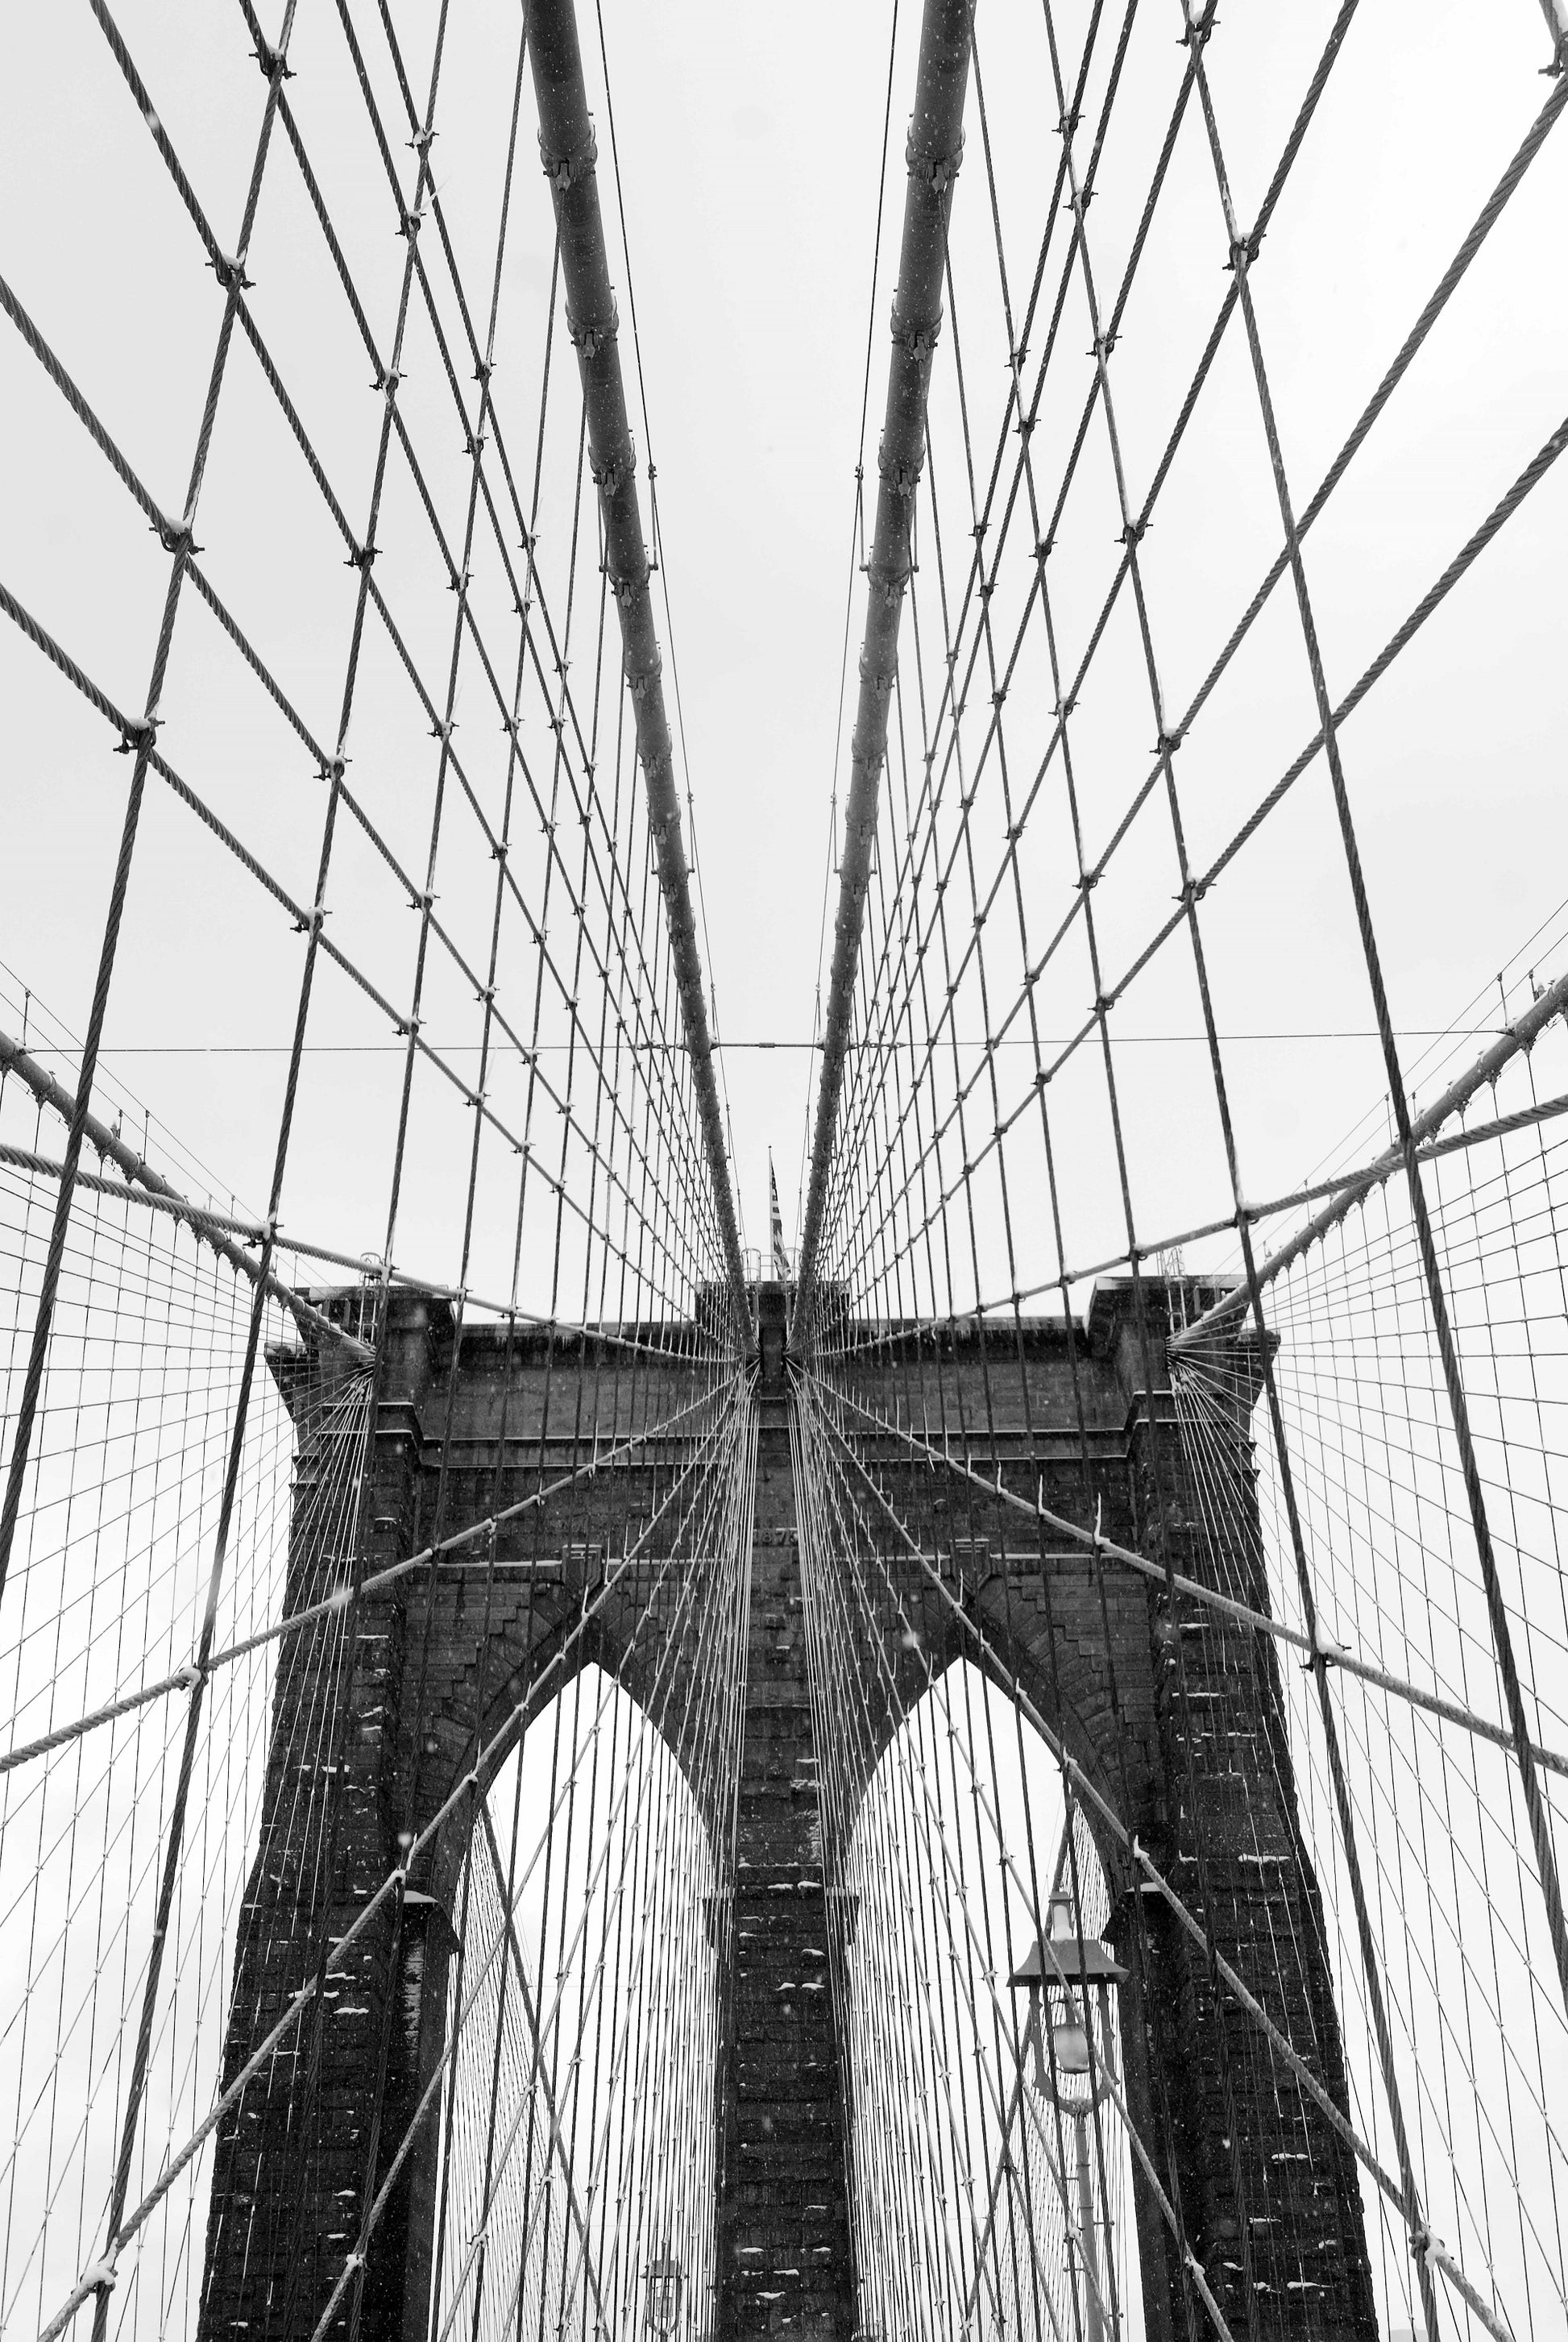 An image that encompasses the geometry and architectural beauty of New Yorks Brooklyn Bridge